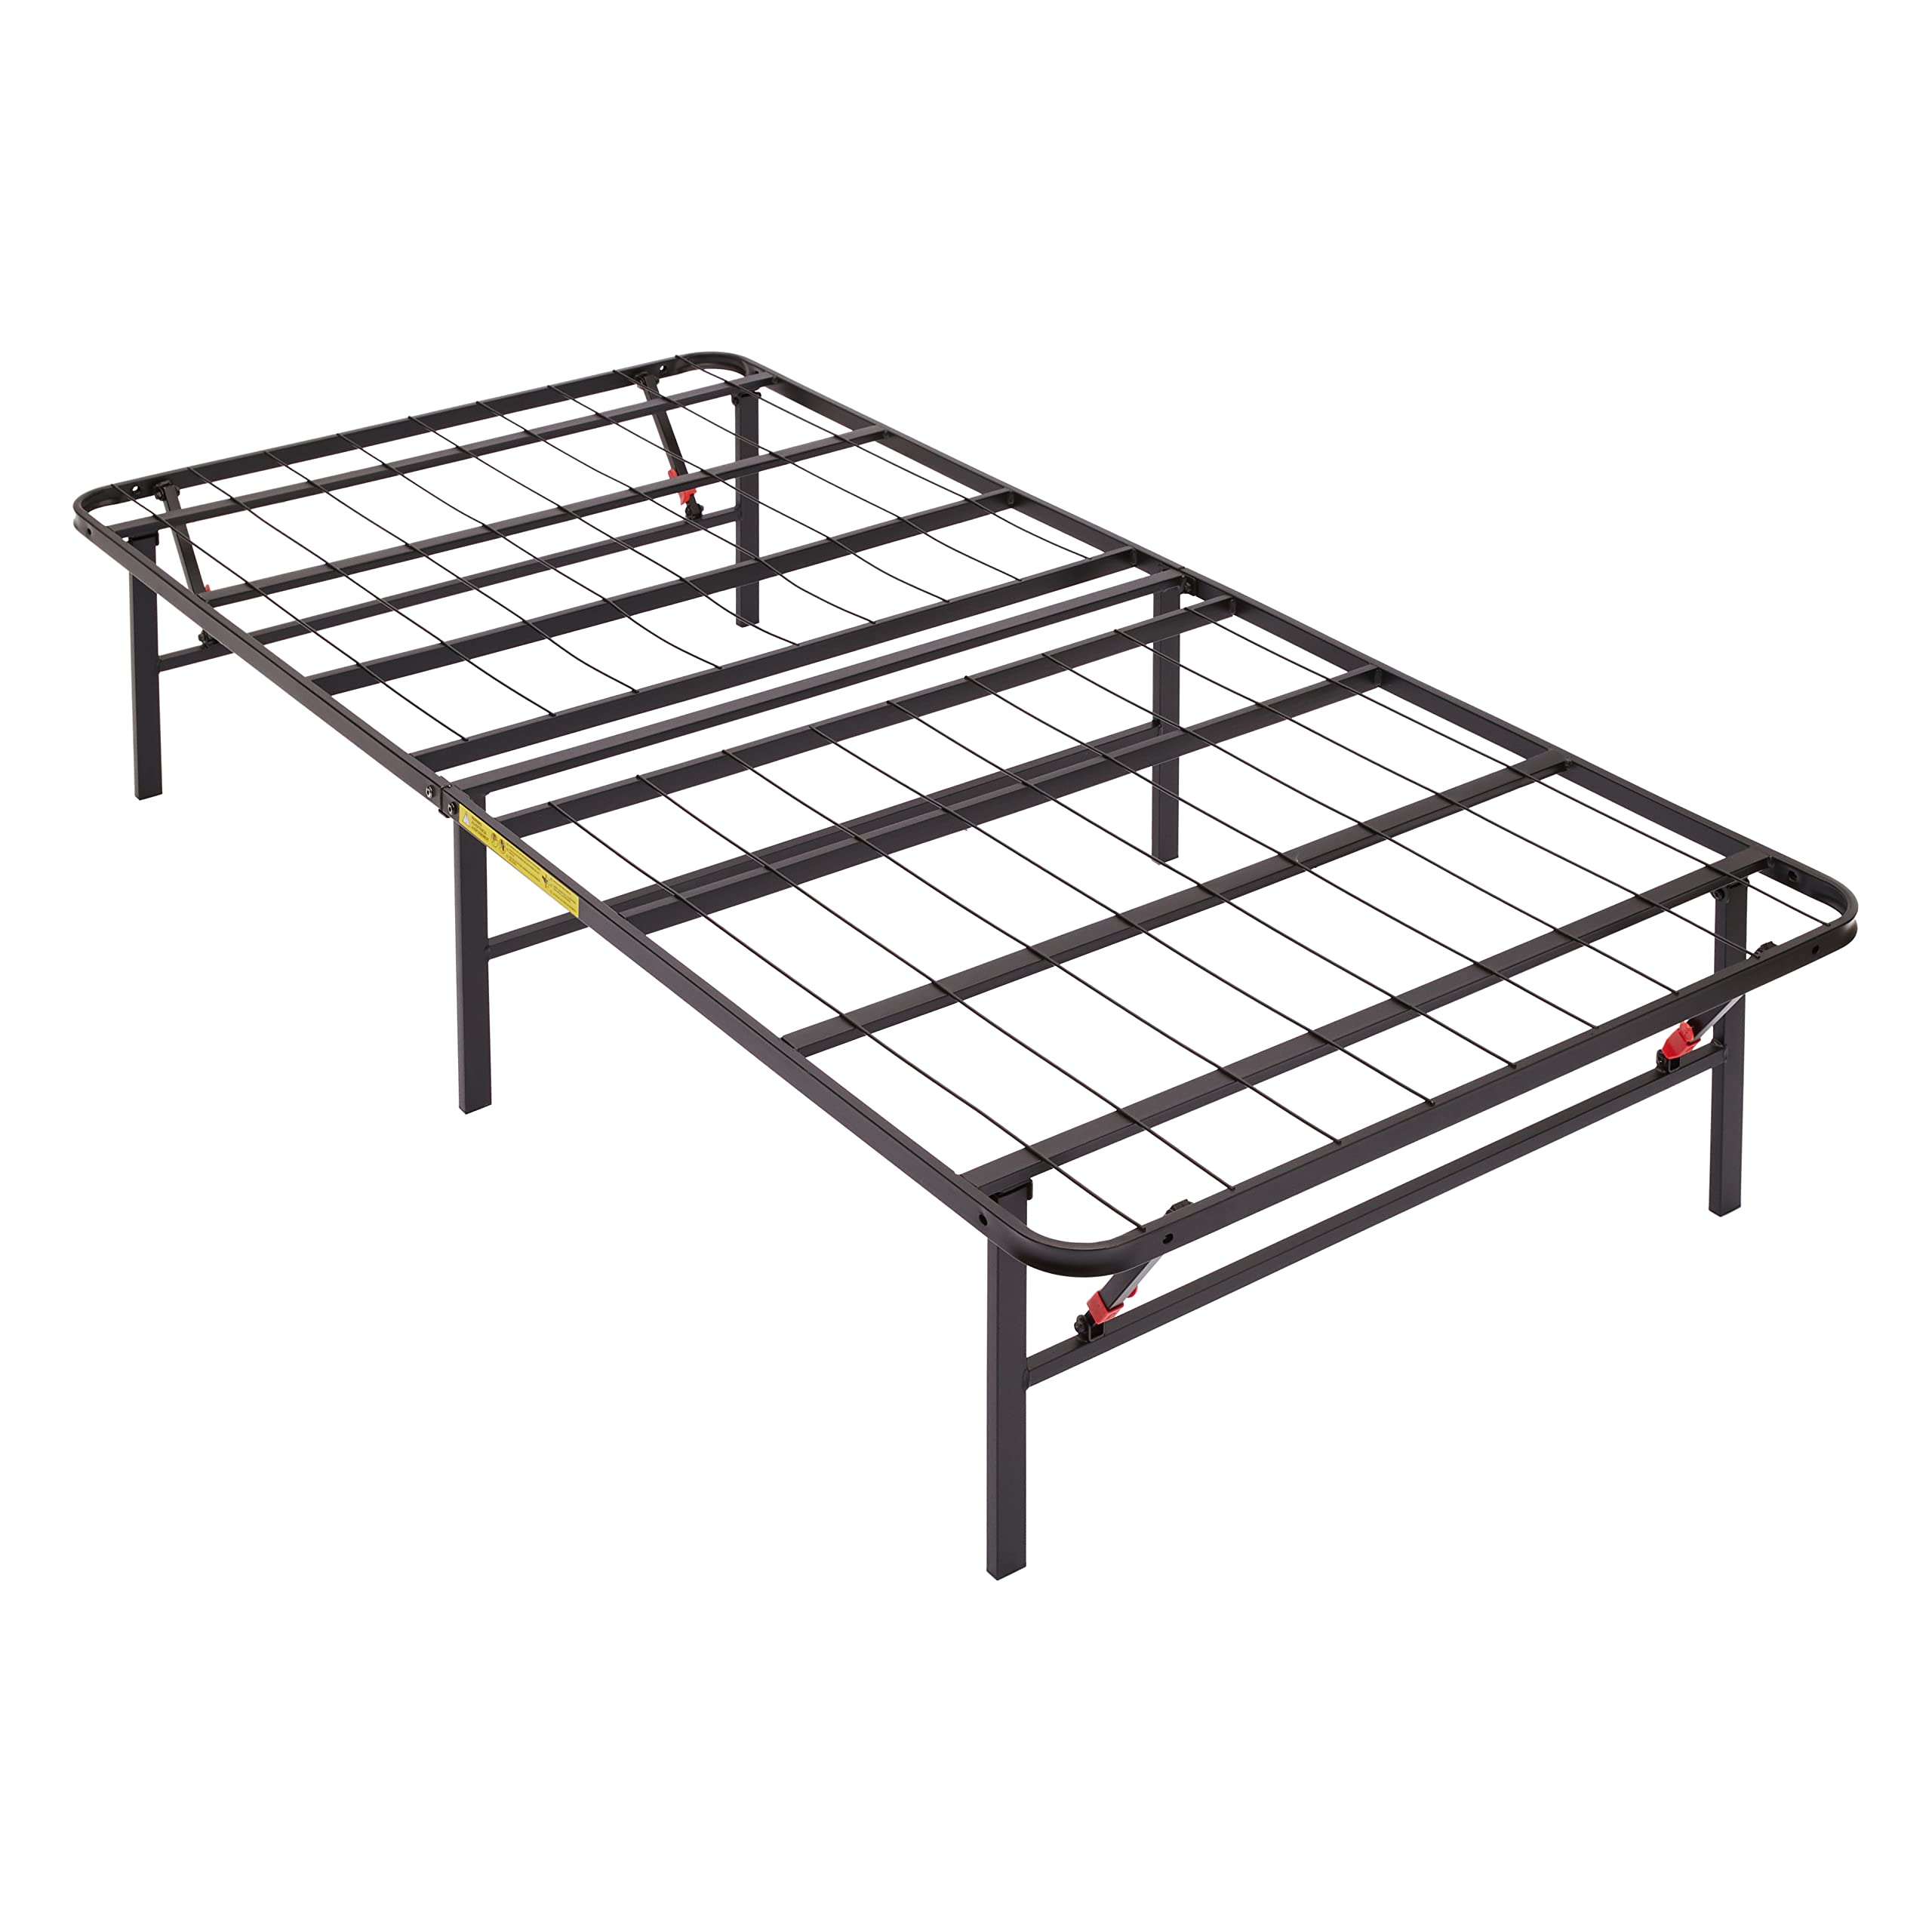 Book Cover Amazon Basics Foldable Metal Platform Bed Frame with Tool Free Setup, 14 Inches High, Twin XL, Black Twin XL 14-Inch